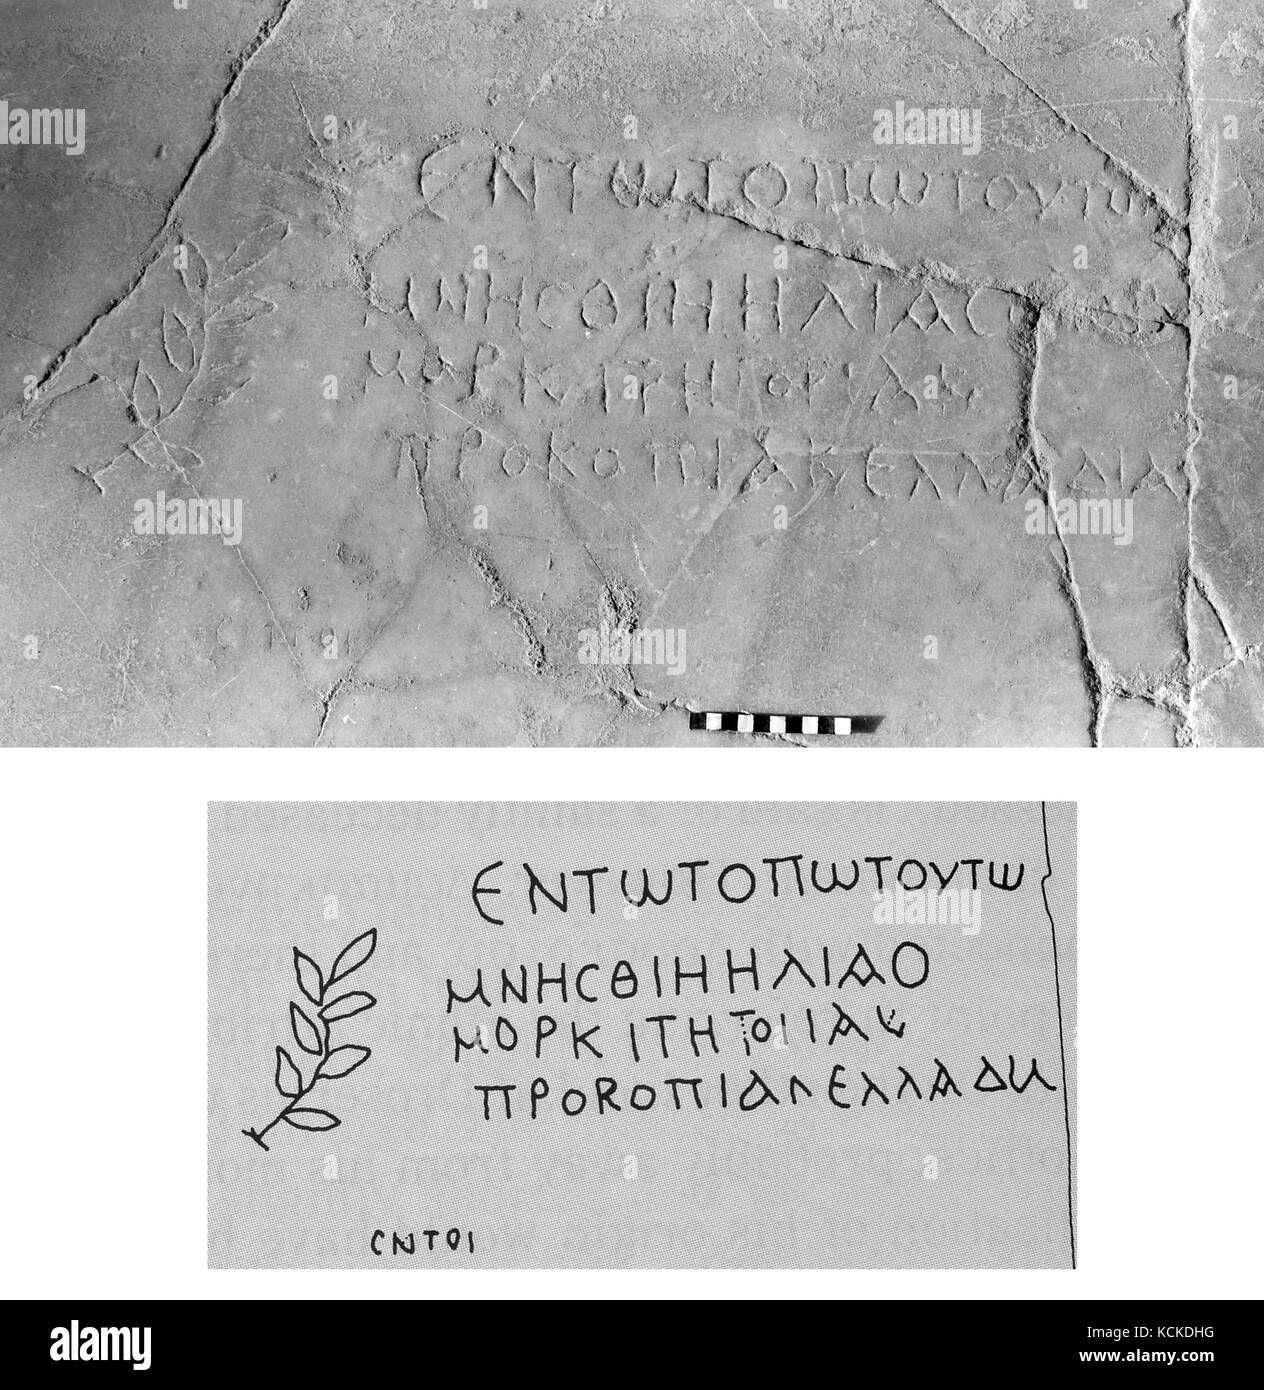 6155-1- Hamat Gader, Greek inscription from the Roman period baths in southern Golan near the Sea of Galilee Stock Photo